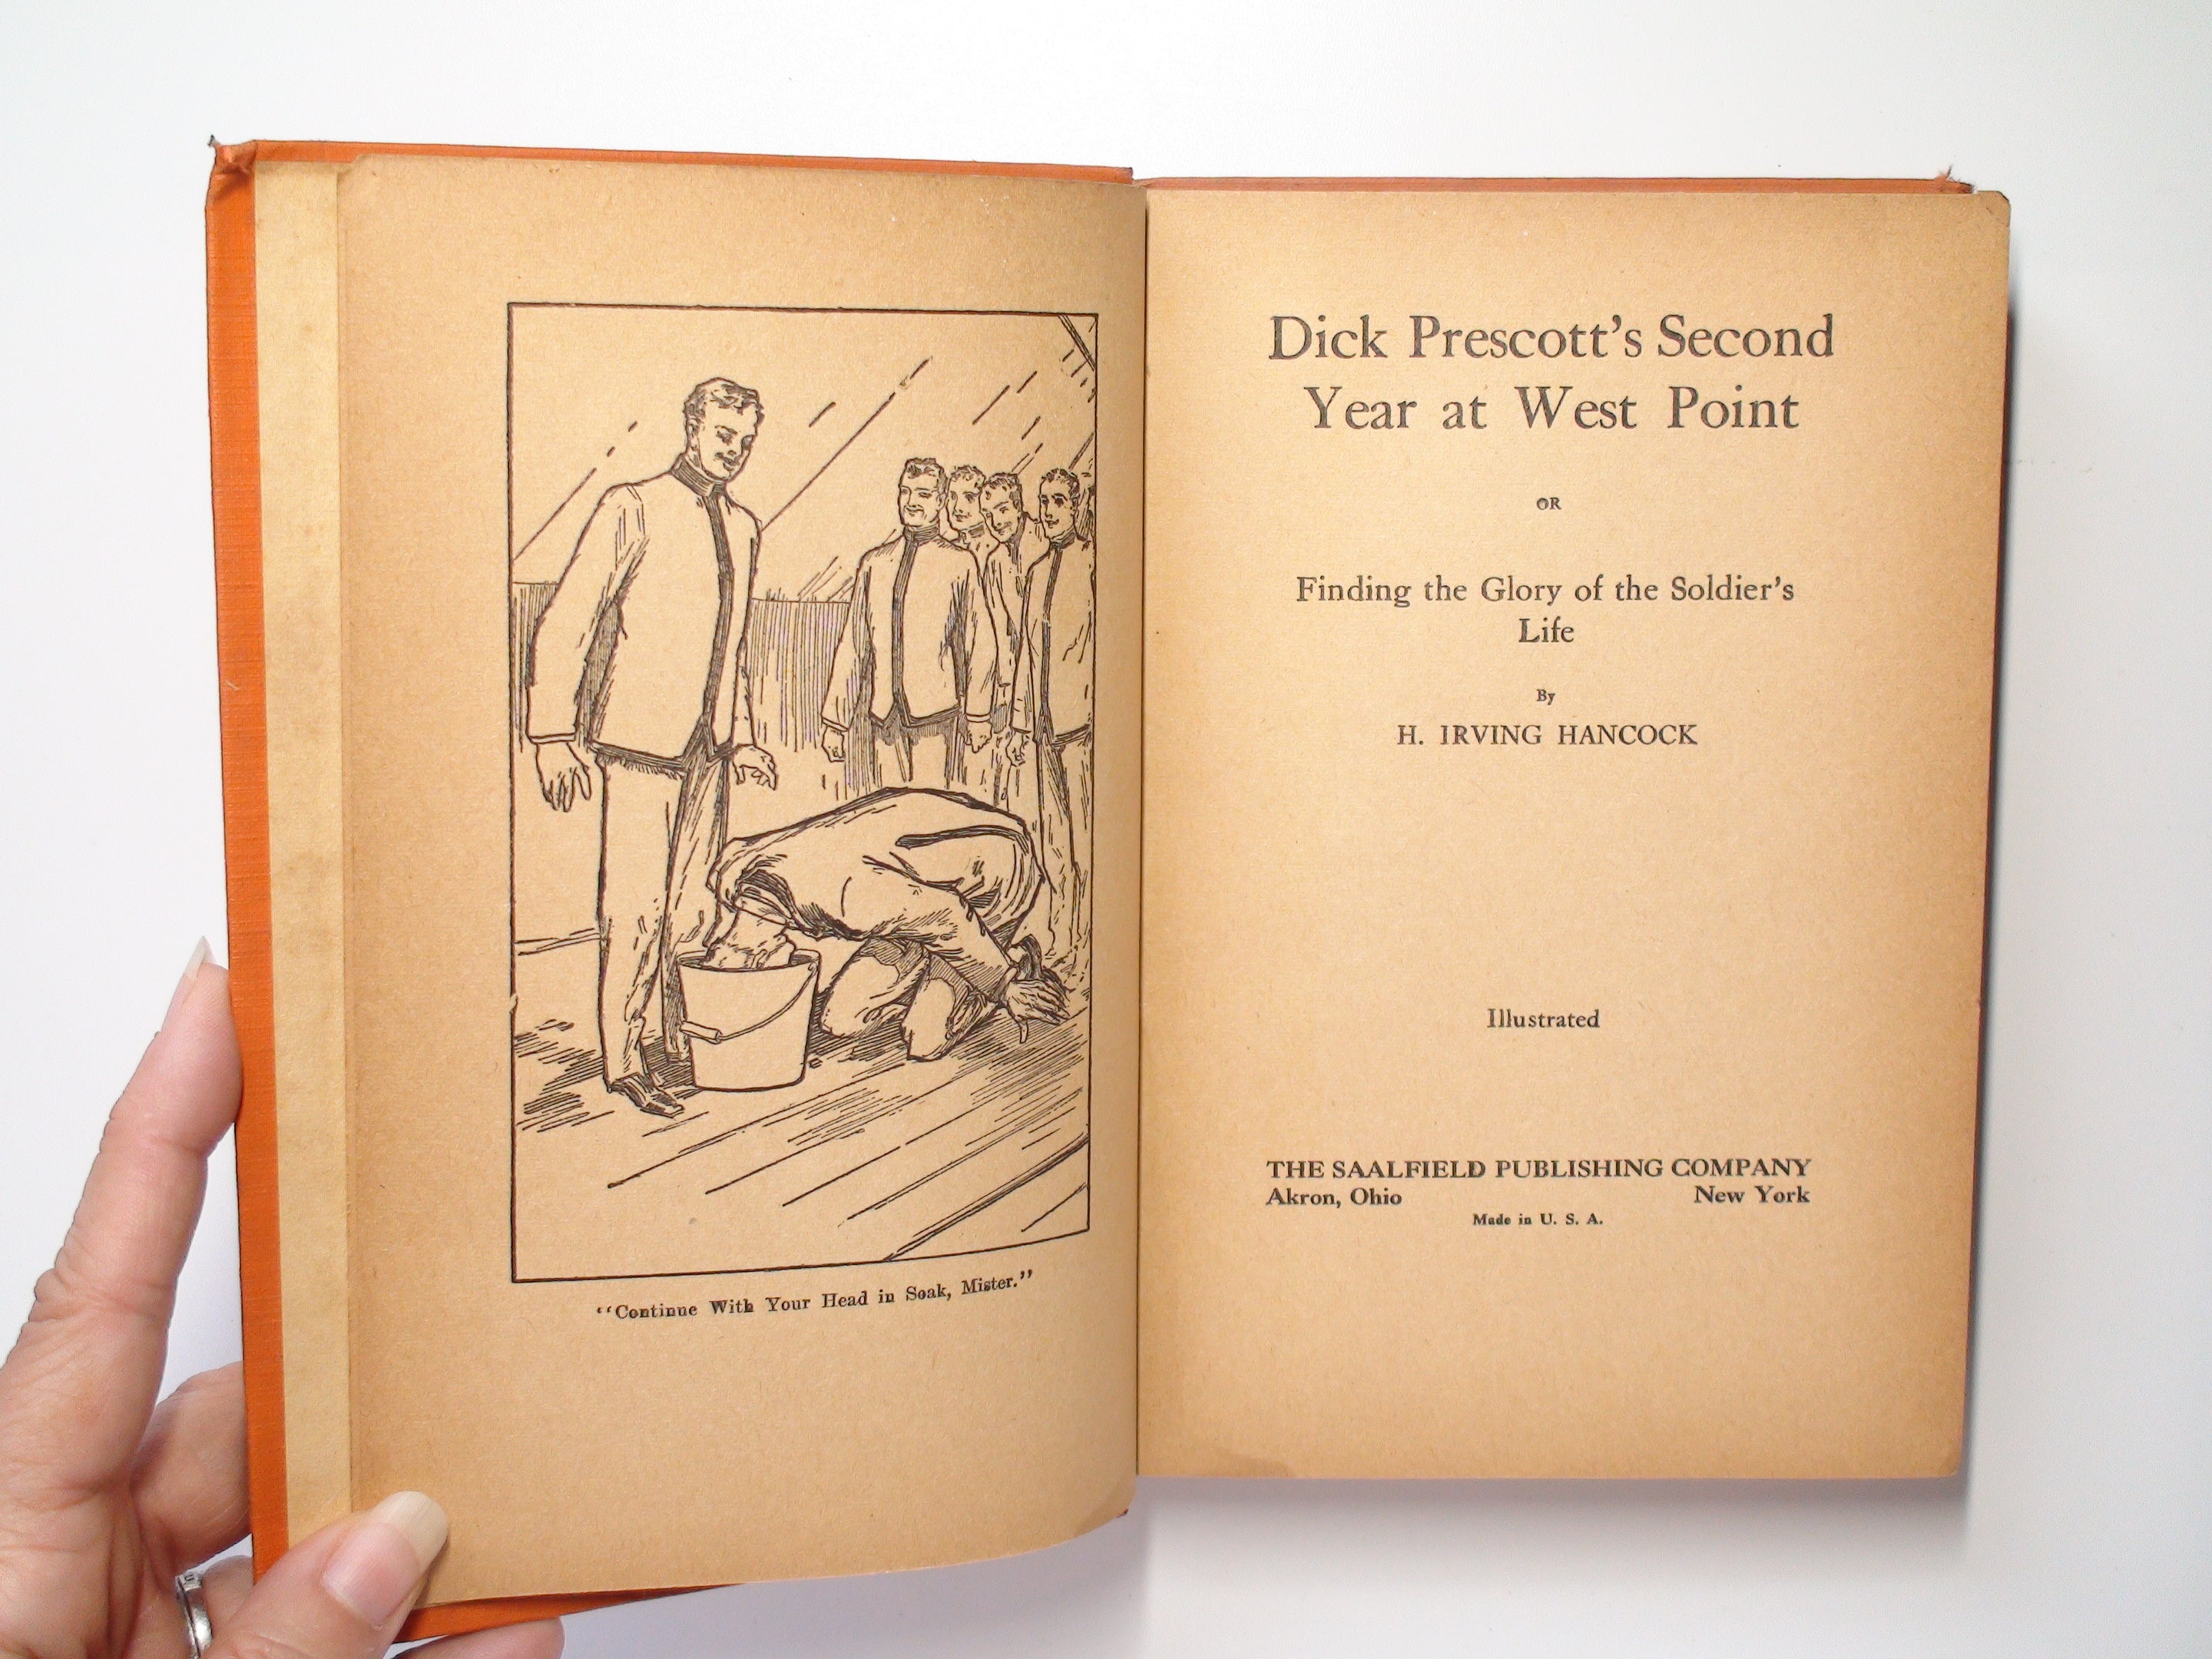 Dick Prescott's Second Year at West Point, H. Irving Hancock, 1st Ed, 1911